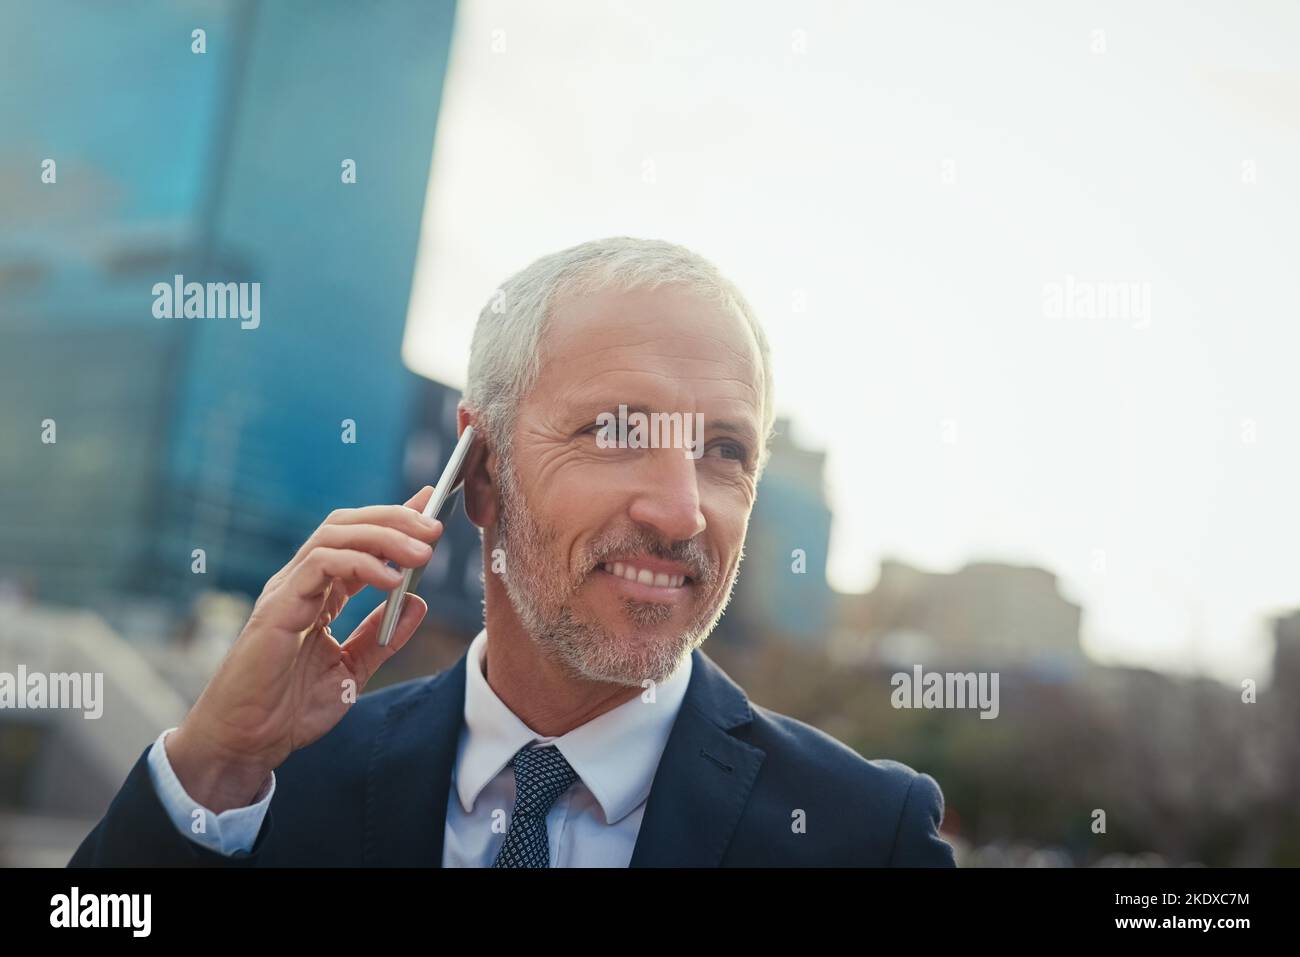 I call the shots around here. a businessman answering his phone while walking to his office in the city. Stock Photo